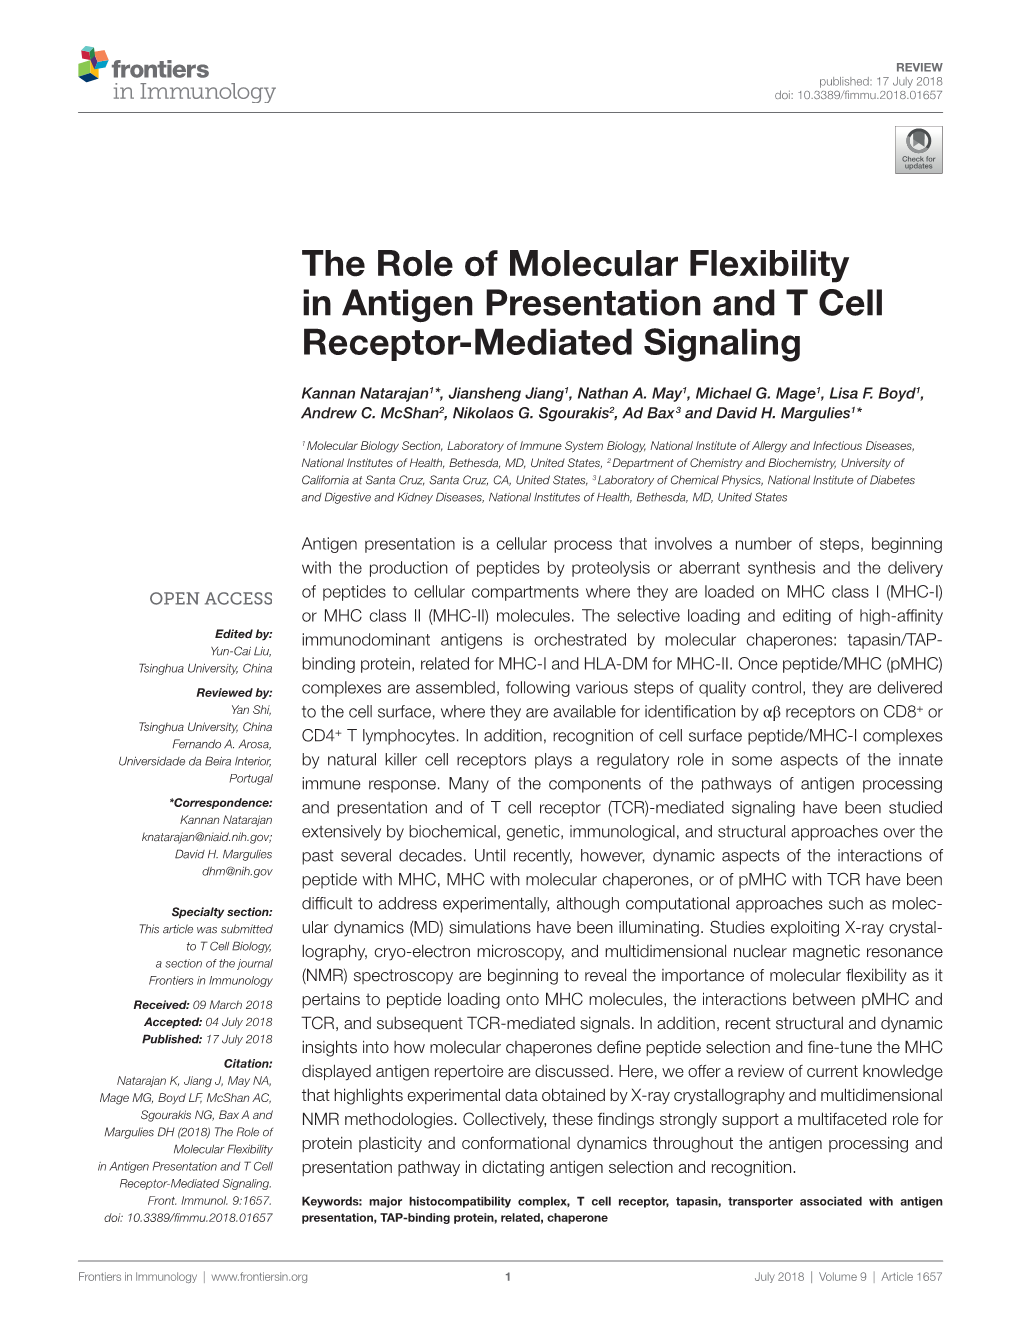 The Role of Molecular Flexibility in Antigen Presentation and T Cell Receptor-Mediated Signaling